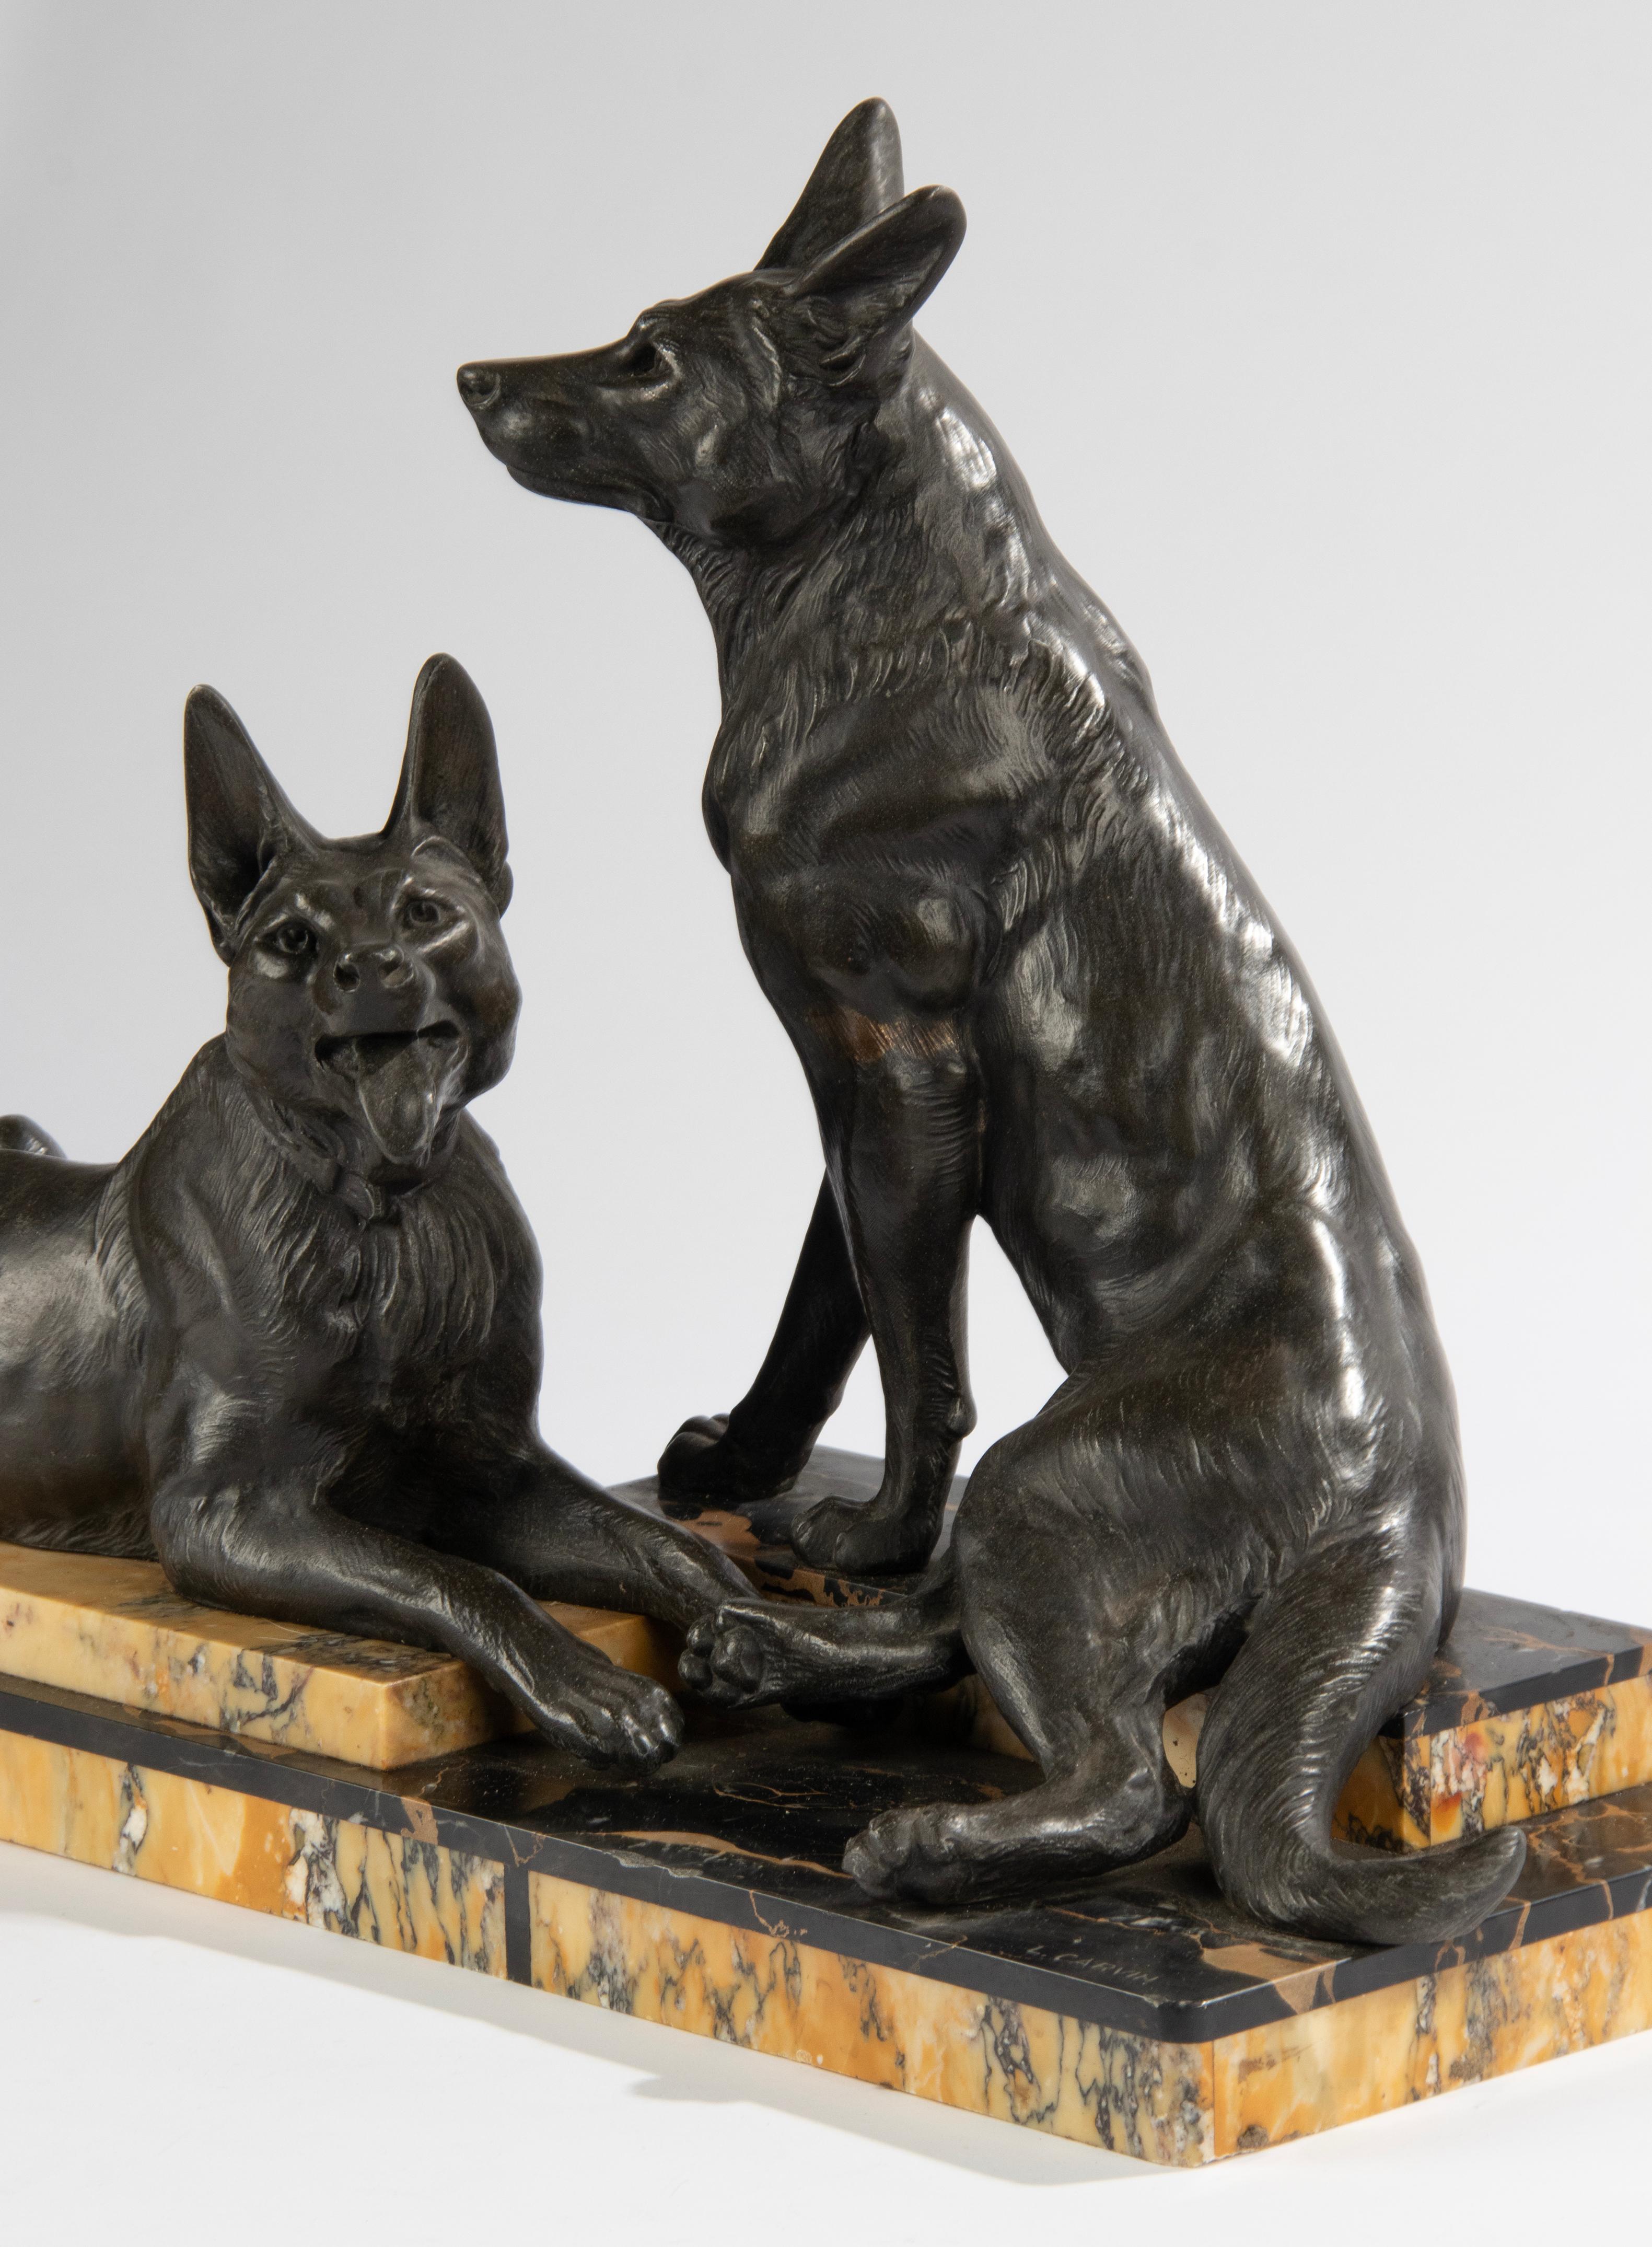 Art Deco Period Sculpture of German or Belgian Sheppards by Louis Carvin For Sale 5